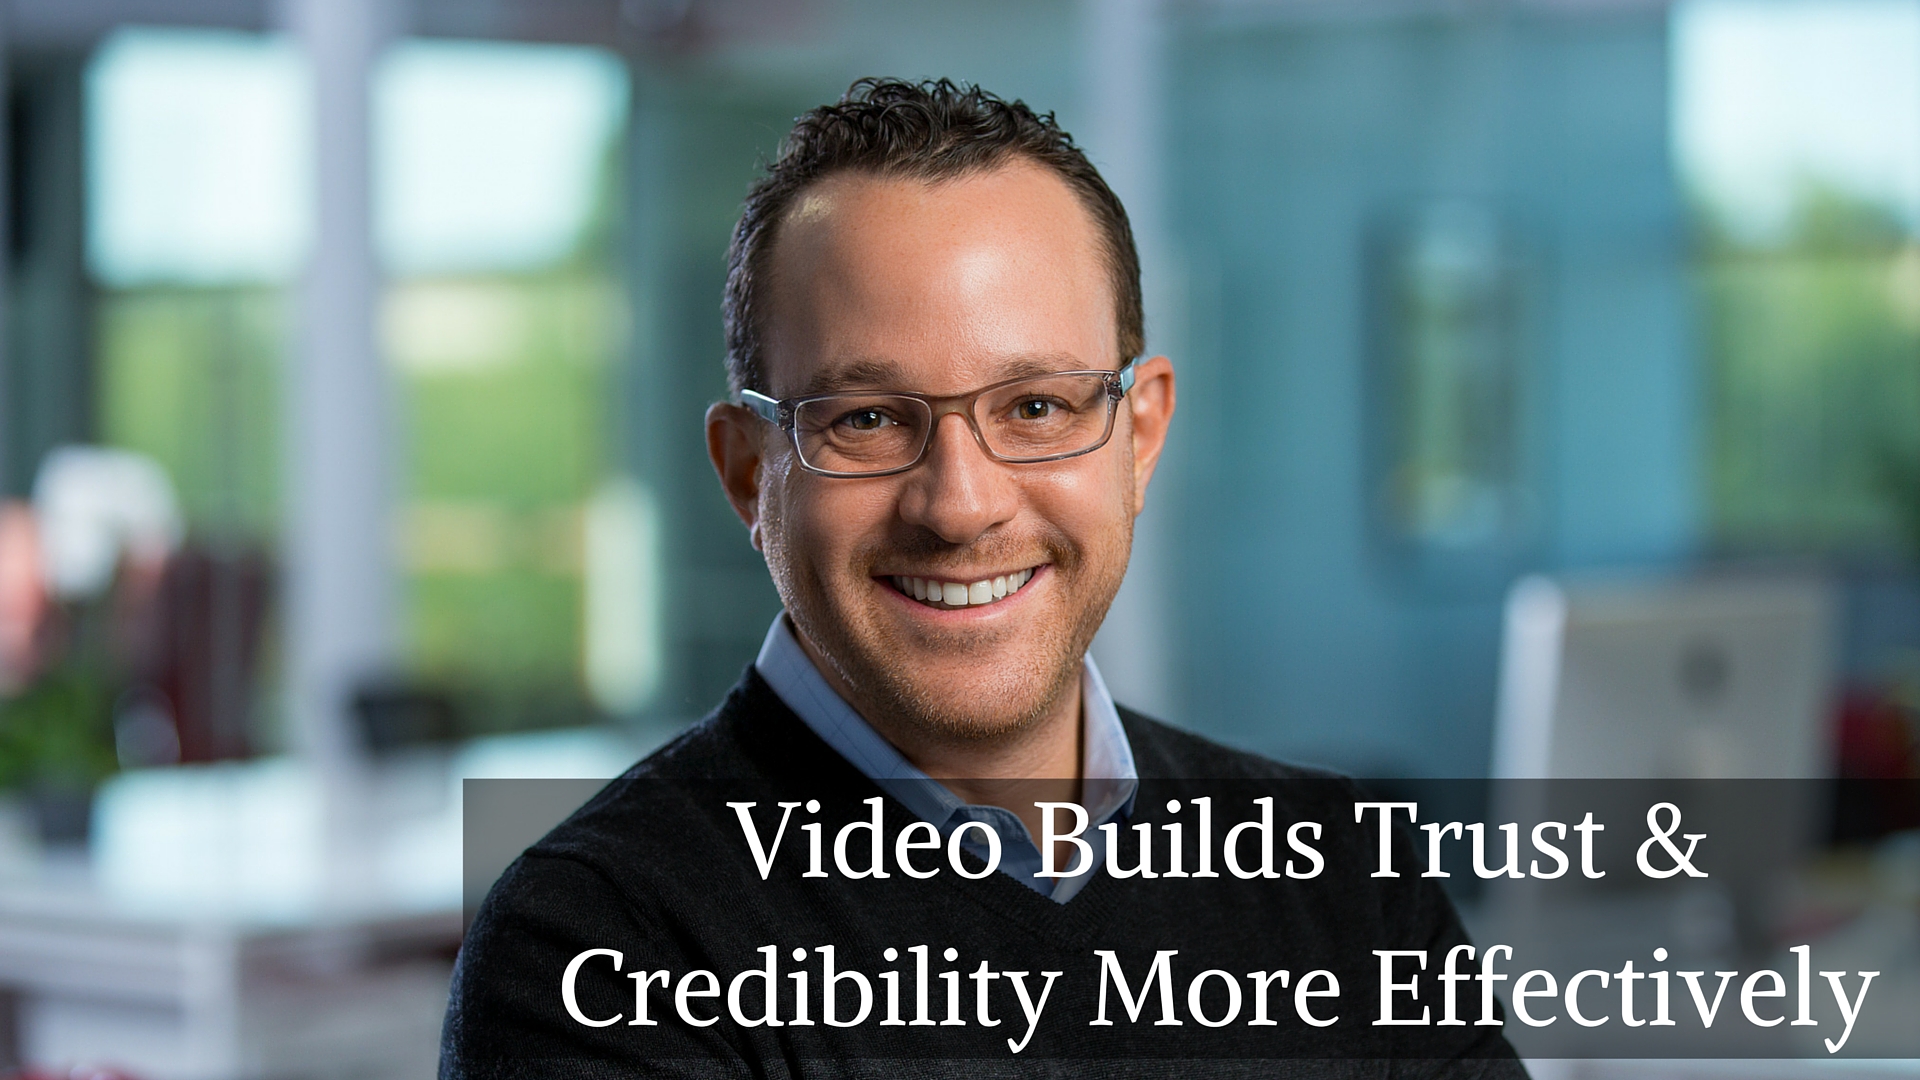 Video Builds Trust & Credibility More Effectively